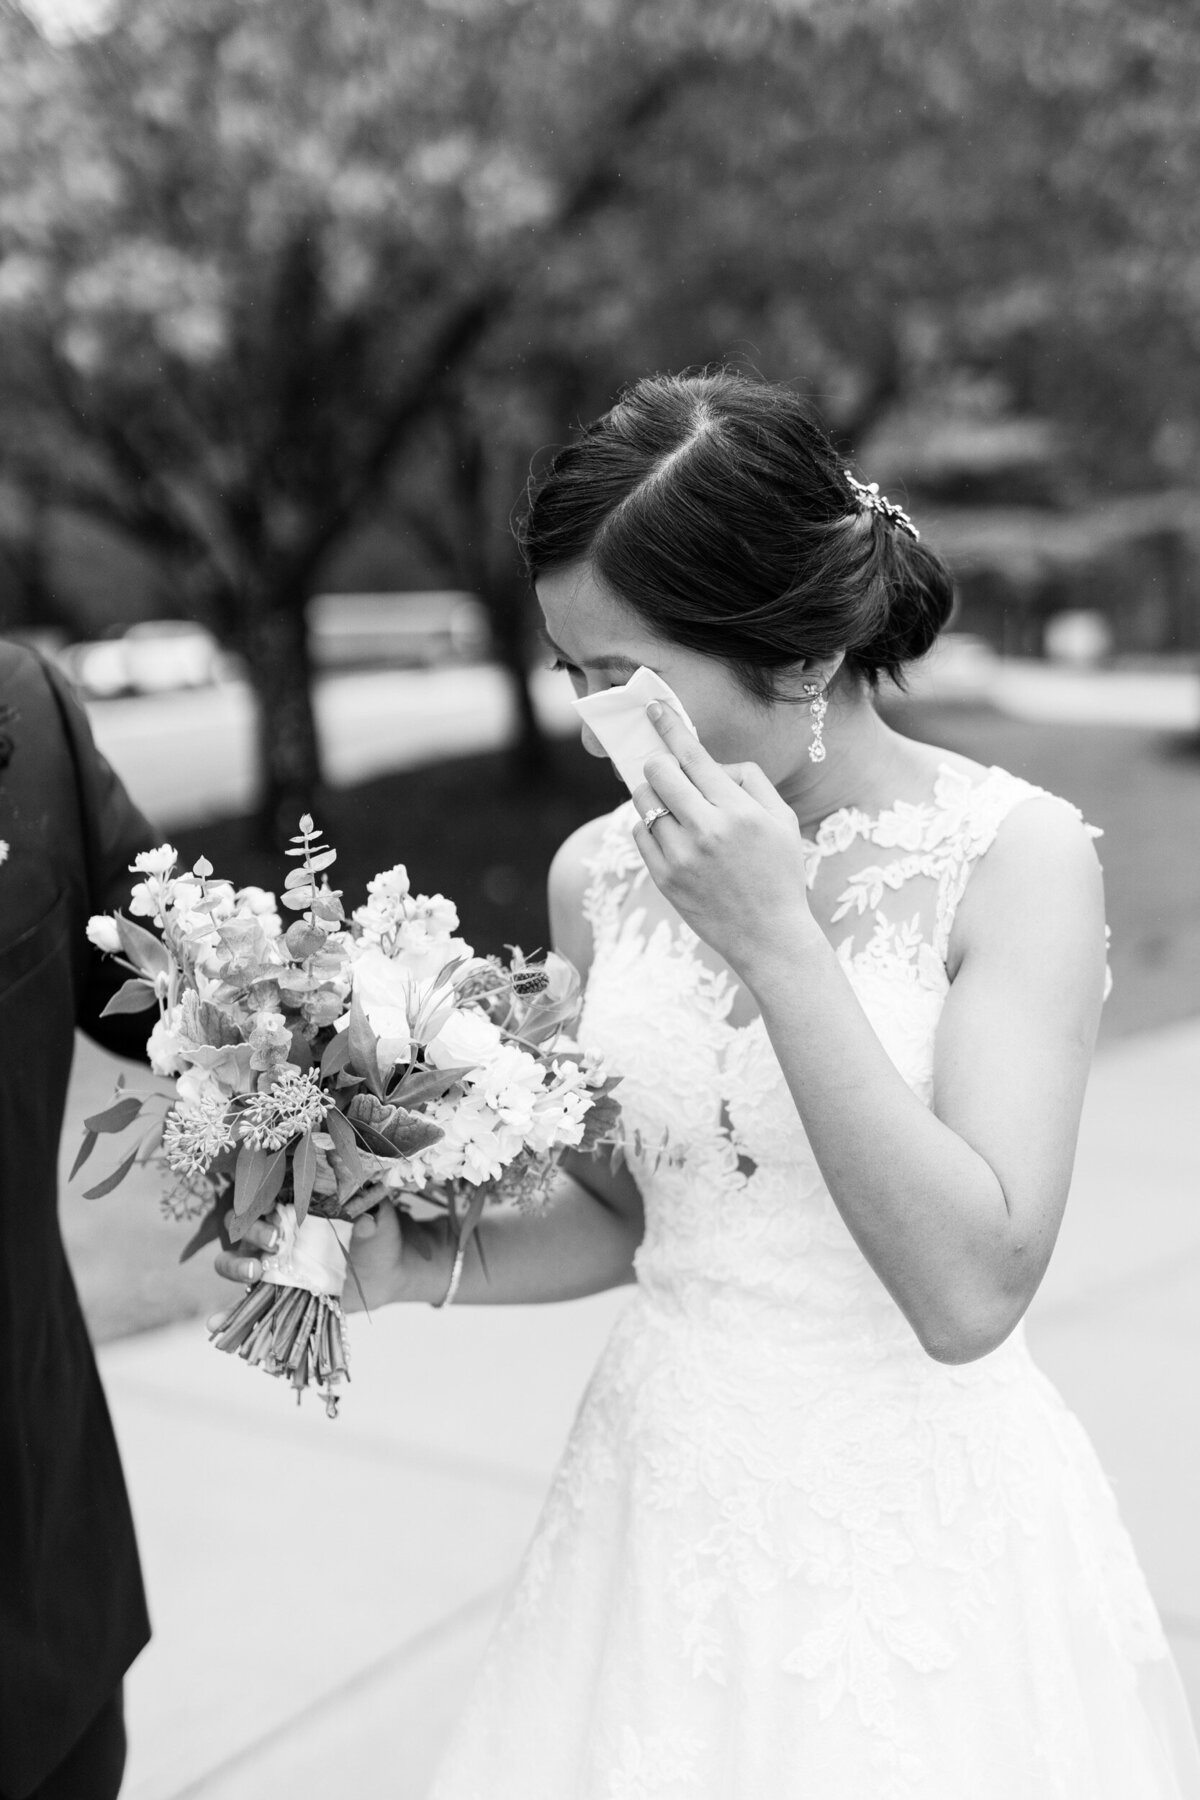 Bride wipes away tear during her first look with her groom on her wedding day in Raleigh, NC.